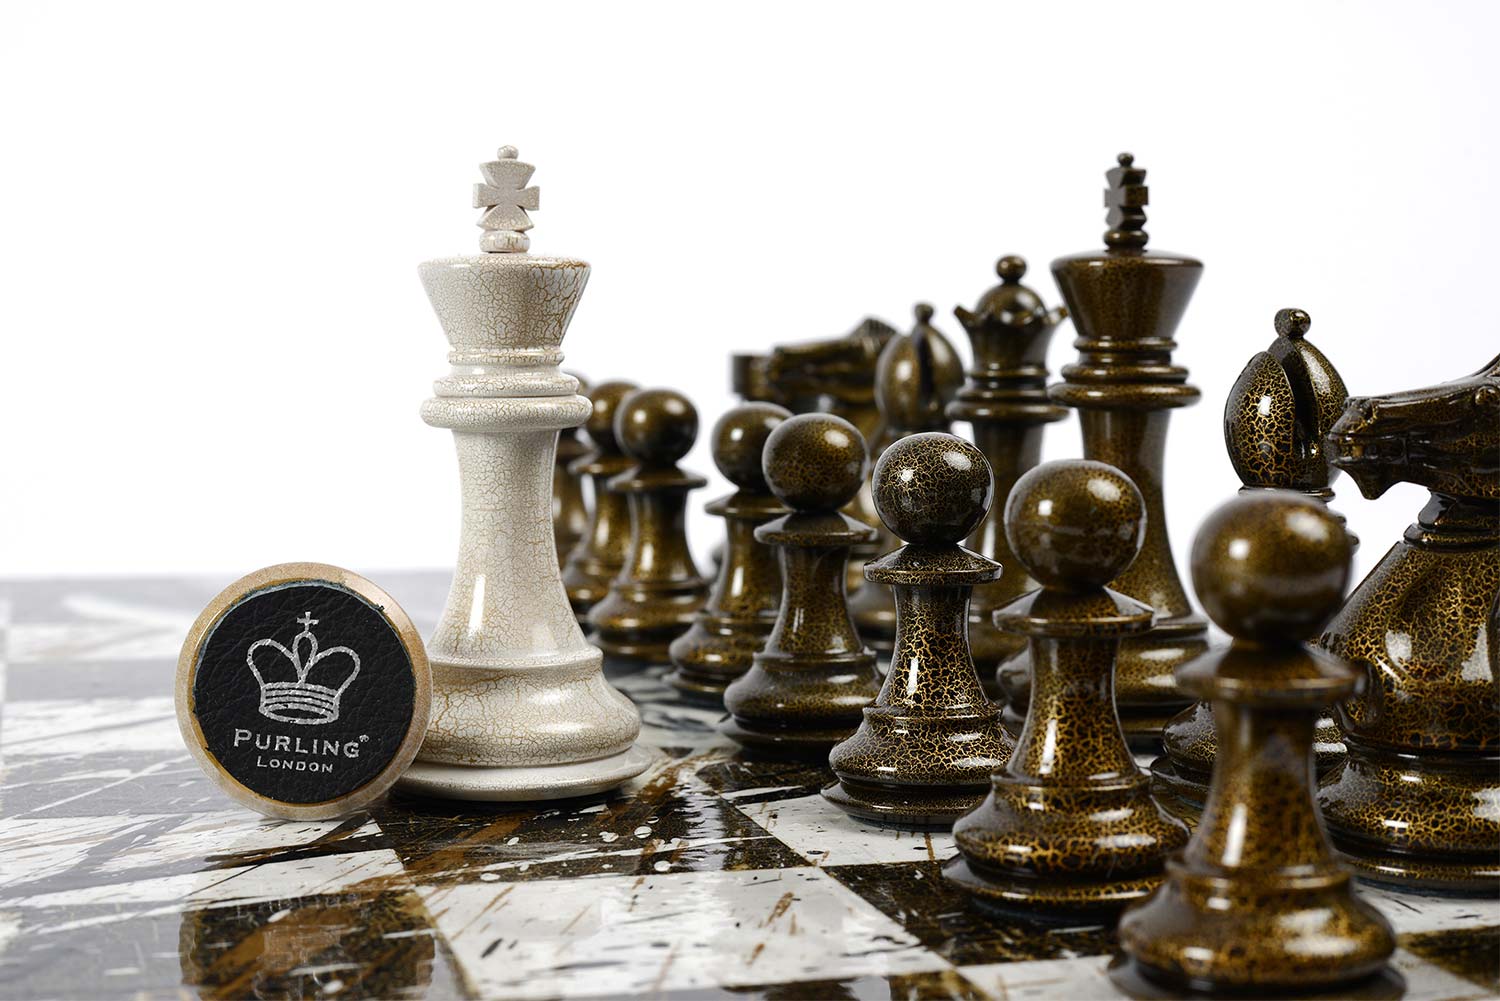 DS Purling chess set